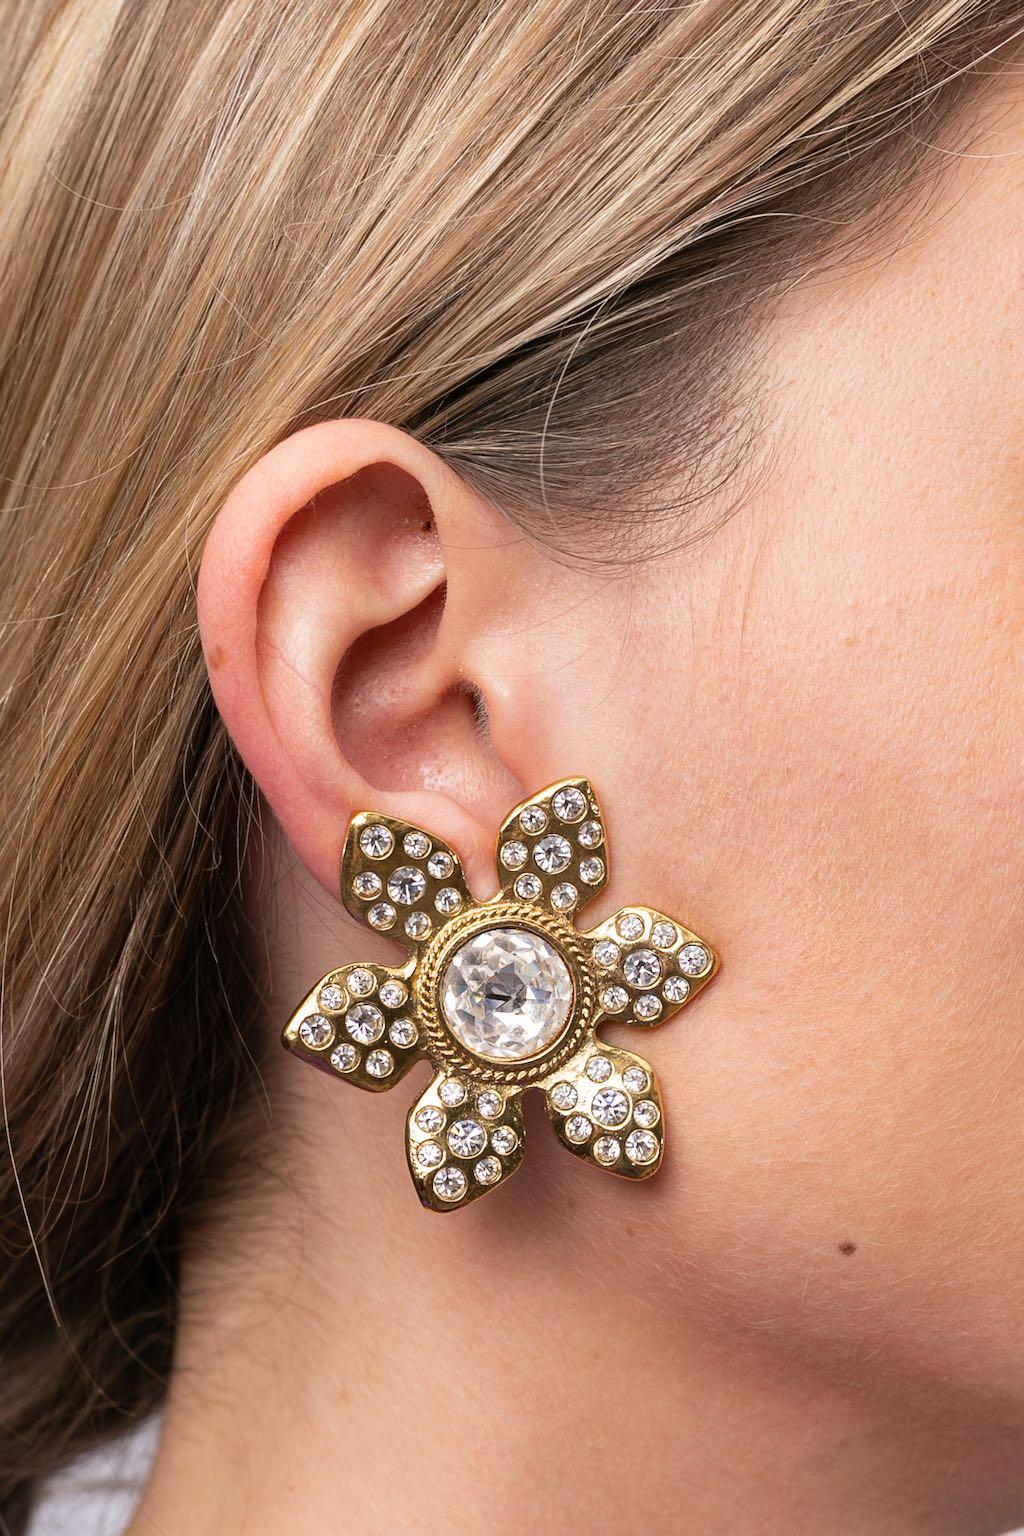 Yves Saint Laurent (Made in France) Gilted metal clip-on earrings paved with rhinestones.
Collection Prêt-à-Porter 1993.

Additional information:
Dimensions: 4 W x 5 H cm (1.57